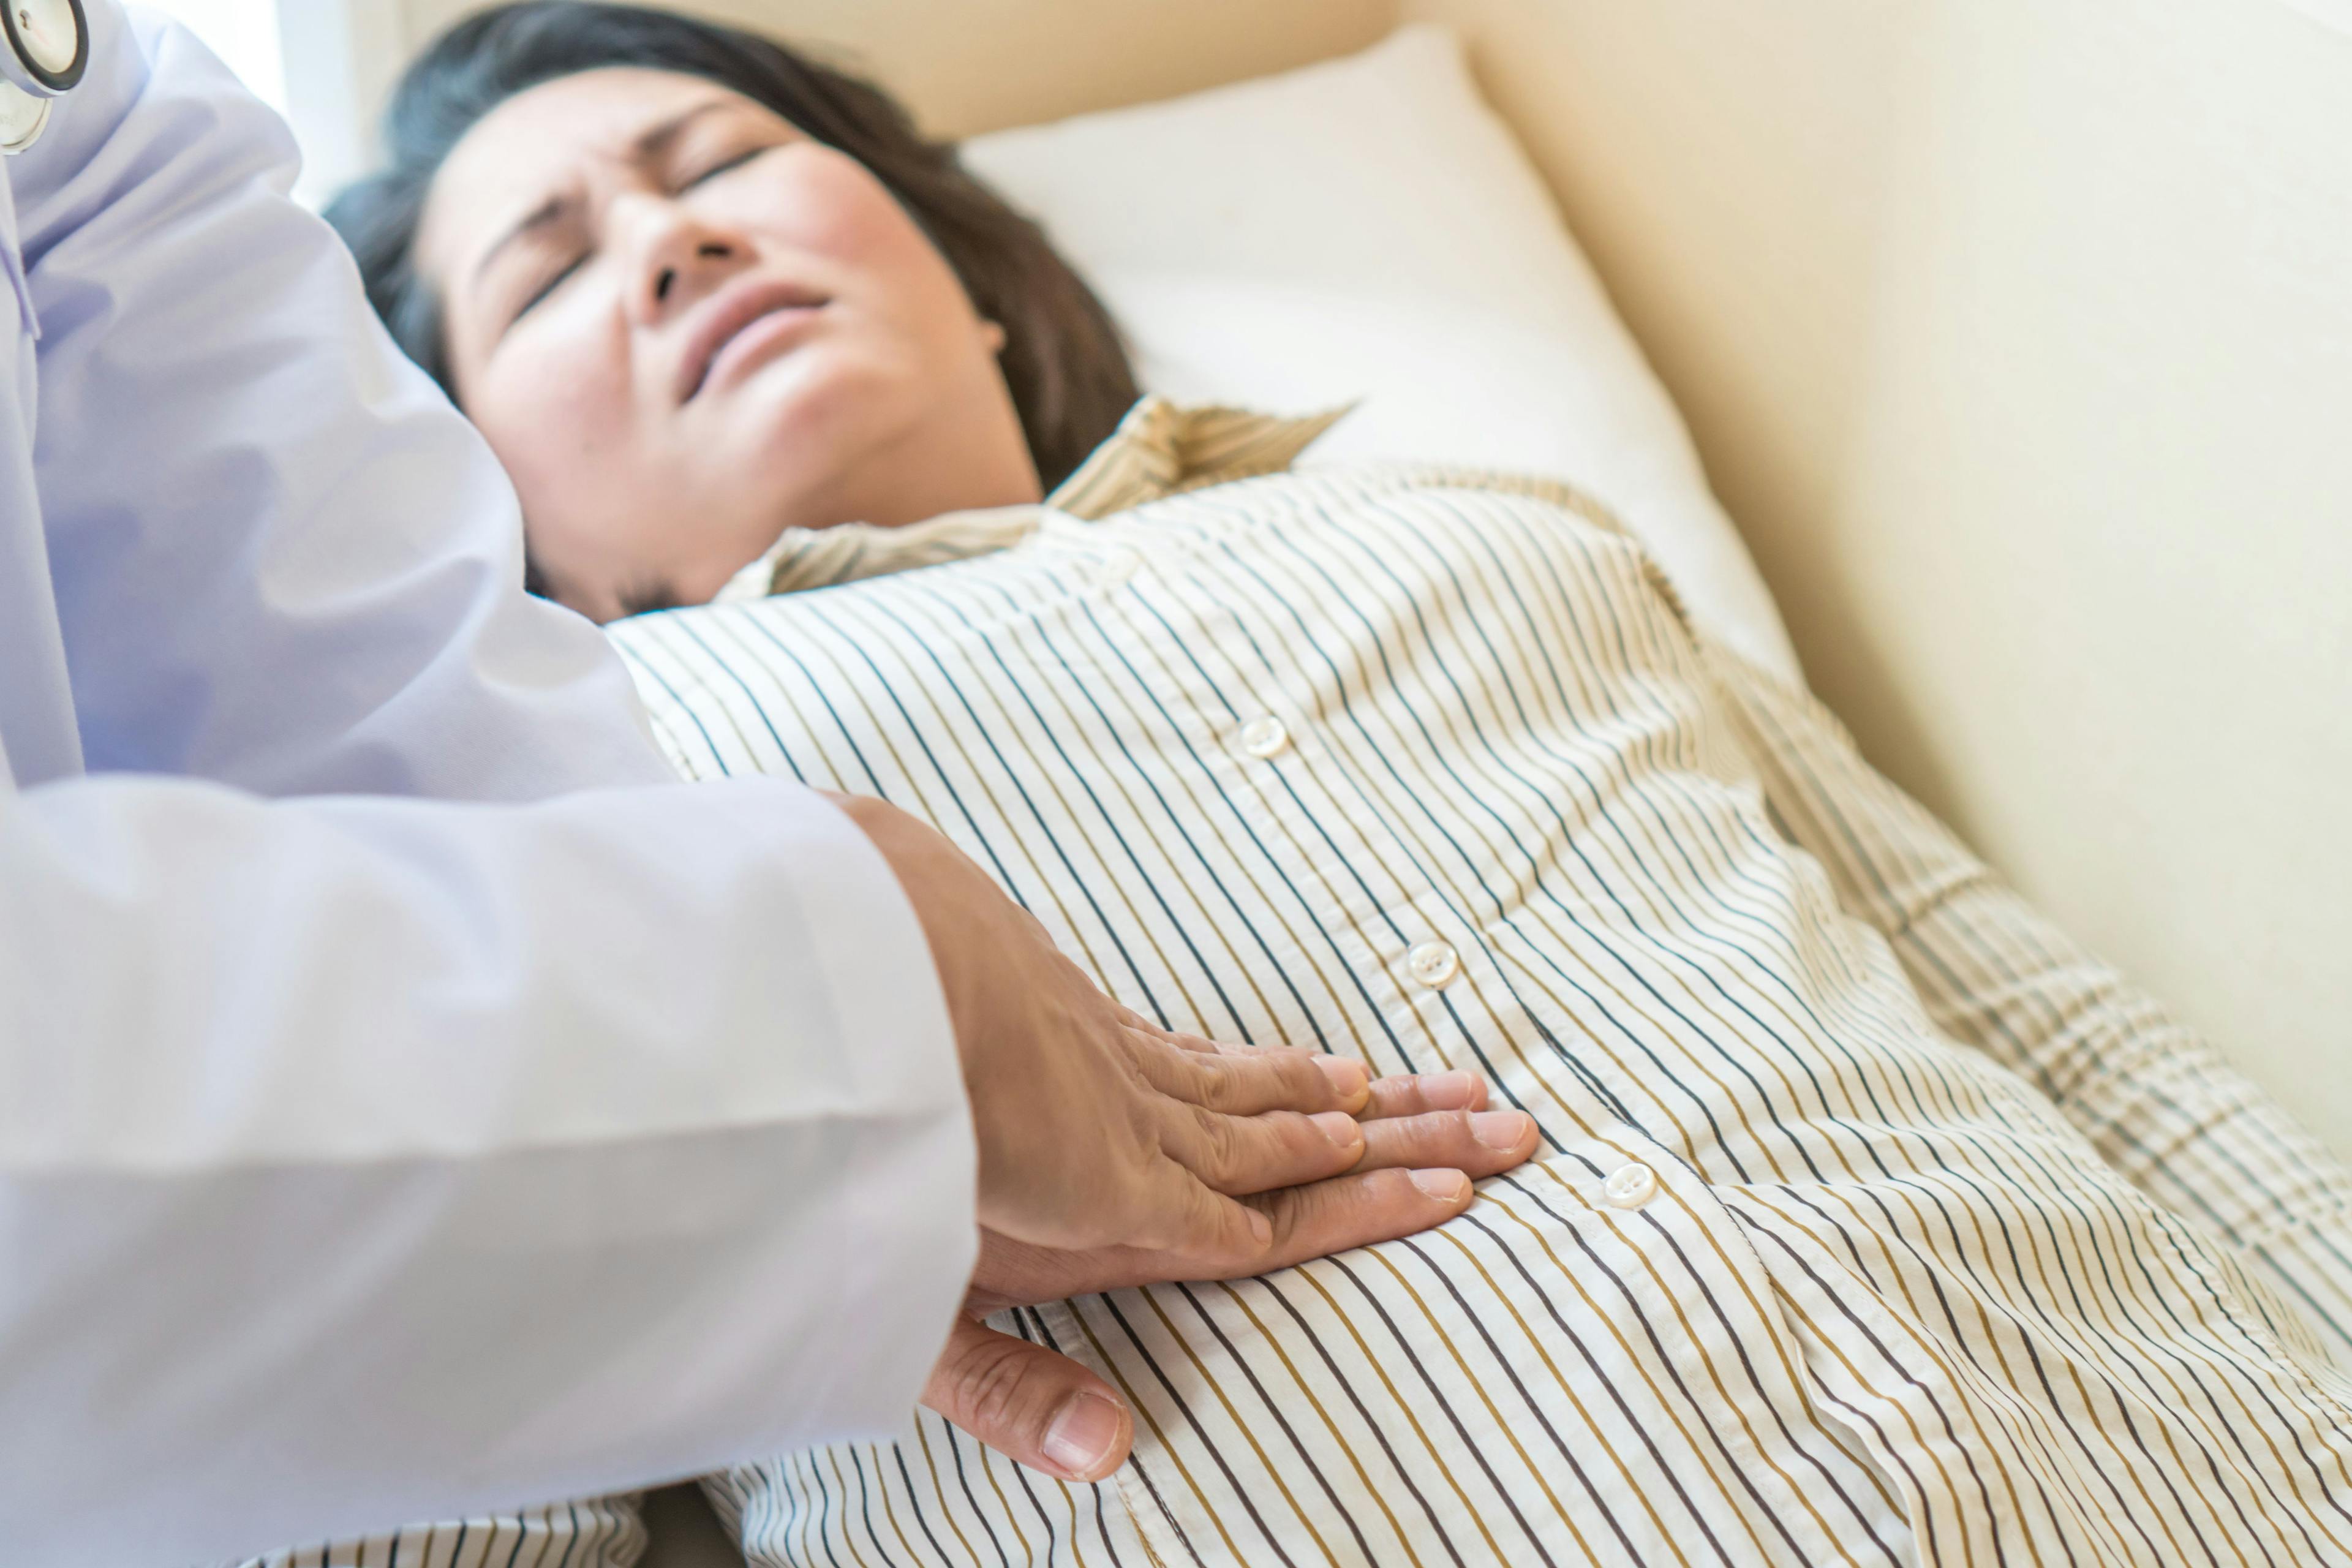 Doctor examining stomach of woman patient and pressing hands on her belly. | Image credit: ©  Pormezz - © stock.adobe.com